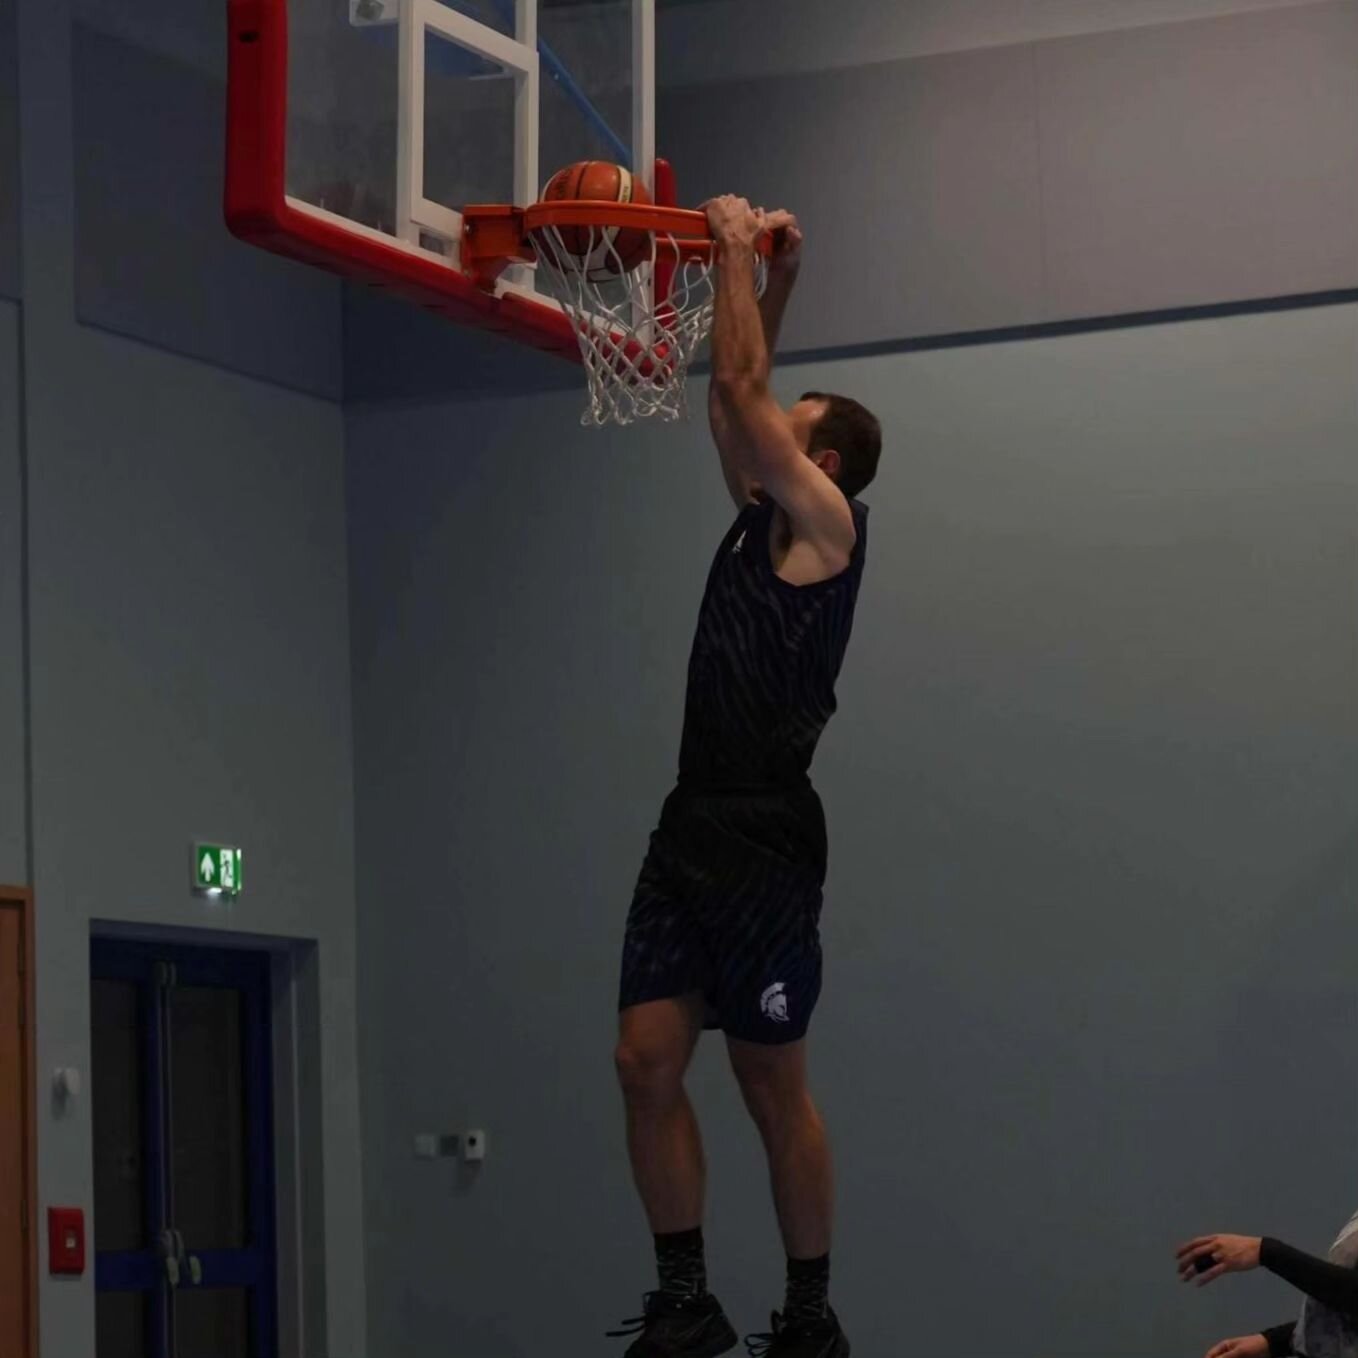 Air Michel cleared for takeoff 🛫 

Captured by @cillianchapon at last night's game where Titans defeated Team X to progress into the Playoff finals vs Squirrels 🏀 🏆 

#basketball #jersey #jerseyci #sport #dunk #playoffs #playoffbound